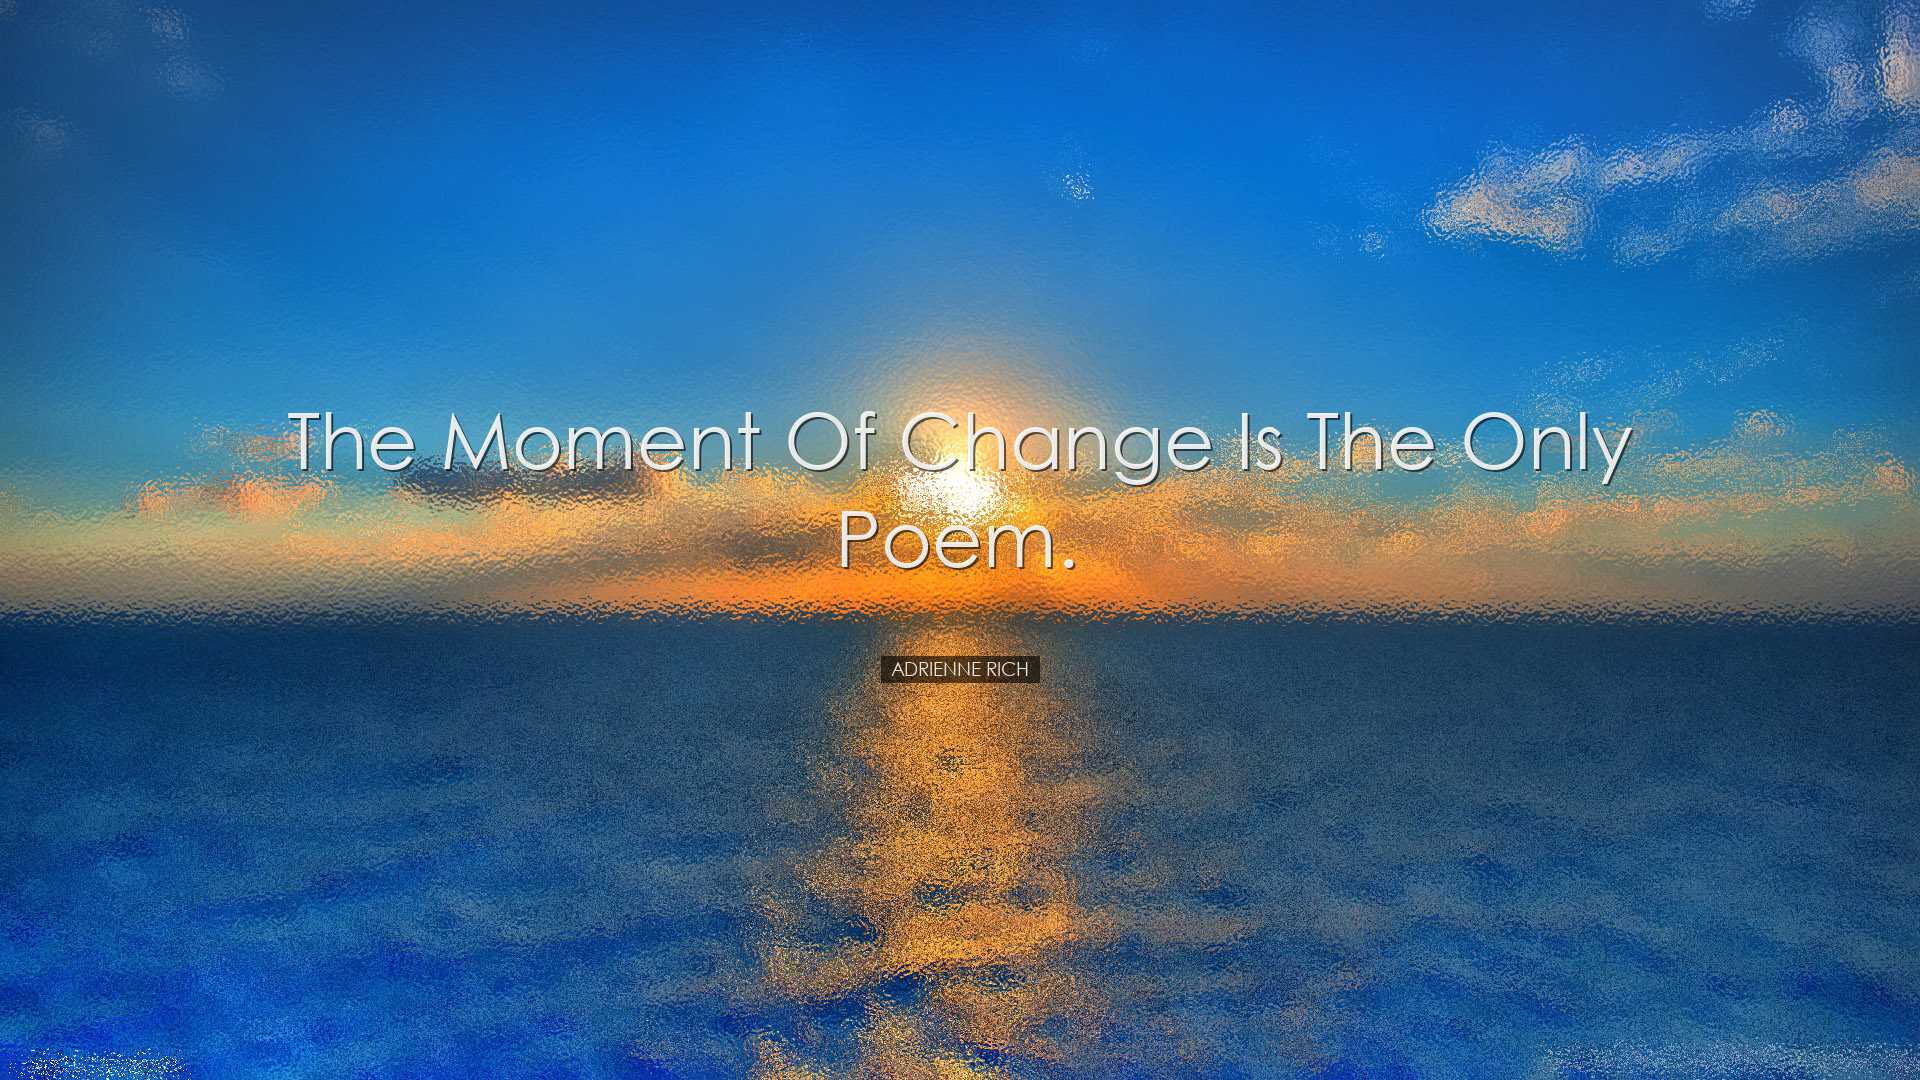 The moment of change is the only poem. - Adrienne Rich